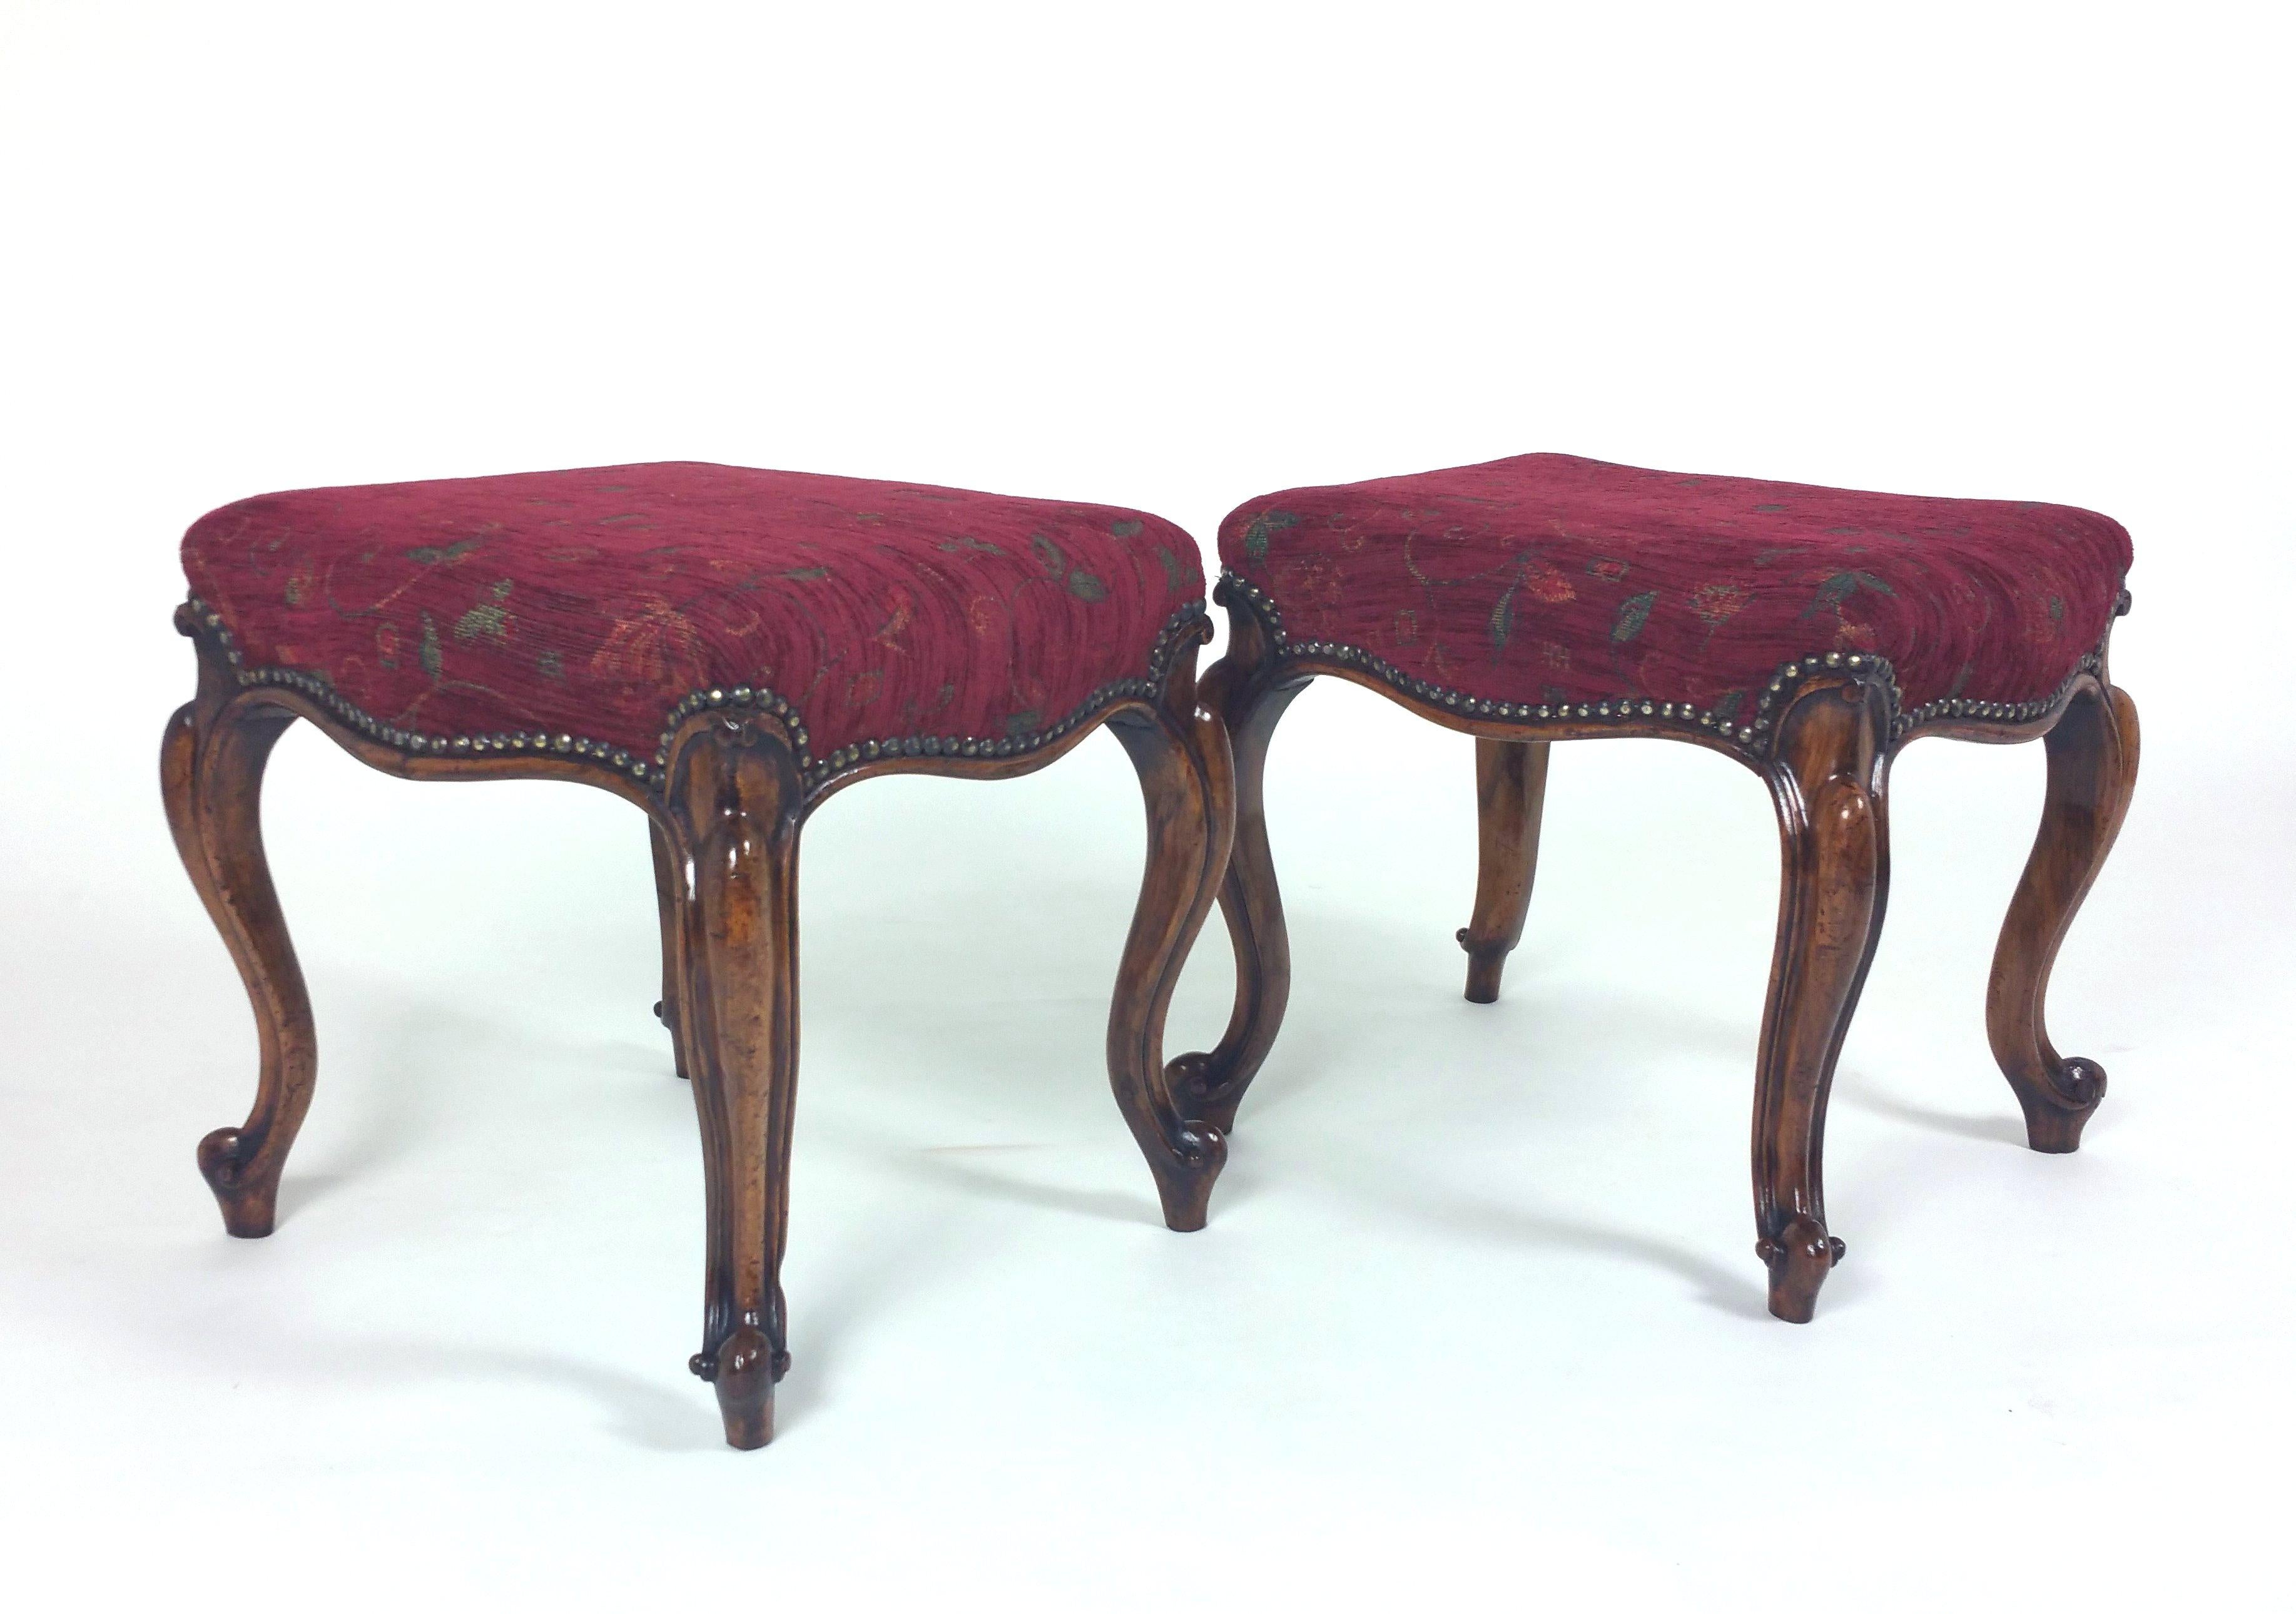 This beautiful and ornately carved pair of Victorian stools feature a rich deep red upholstered tapestry seats, supported on cabriole legs with scroll feet. Each stool measures 18 ½ in – 47 cm wide, 16 ½ in – 42 cm deep and 17 in – 43.2 cm high.